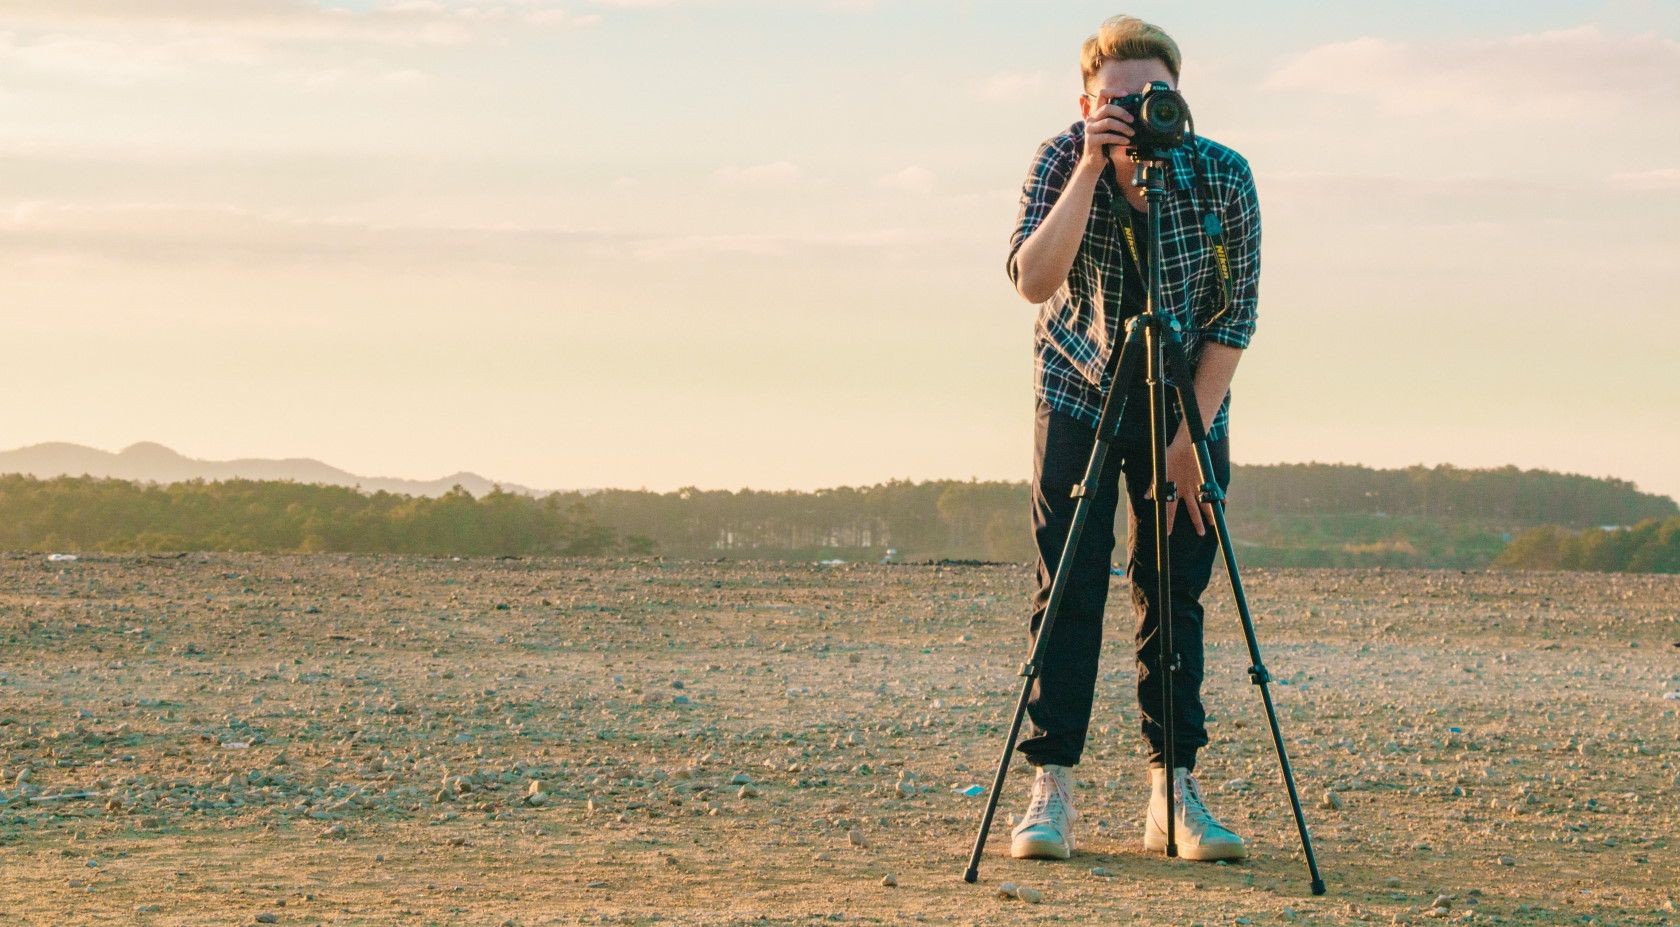 person standing in desert using camera tripod and taking a photograph